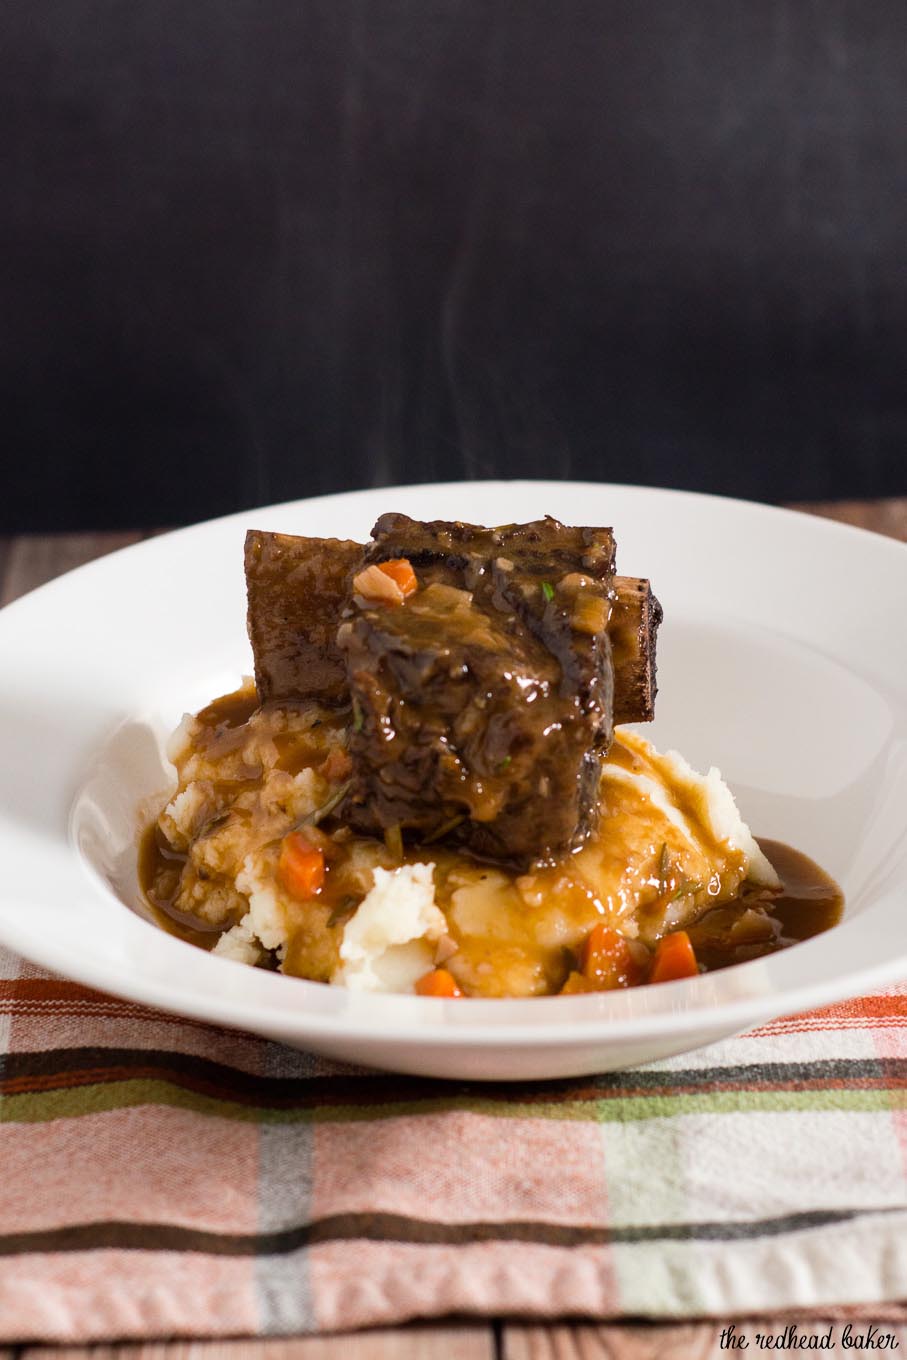 Braised short ribs become fall-off-the-bone tender in a mixture of red wine, beef stock, and garlic. Serve over mashed potatoes for a true comfort meal.